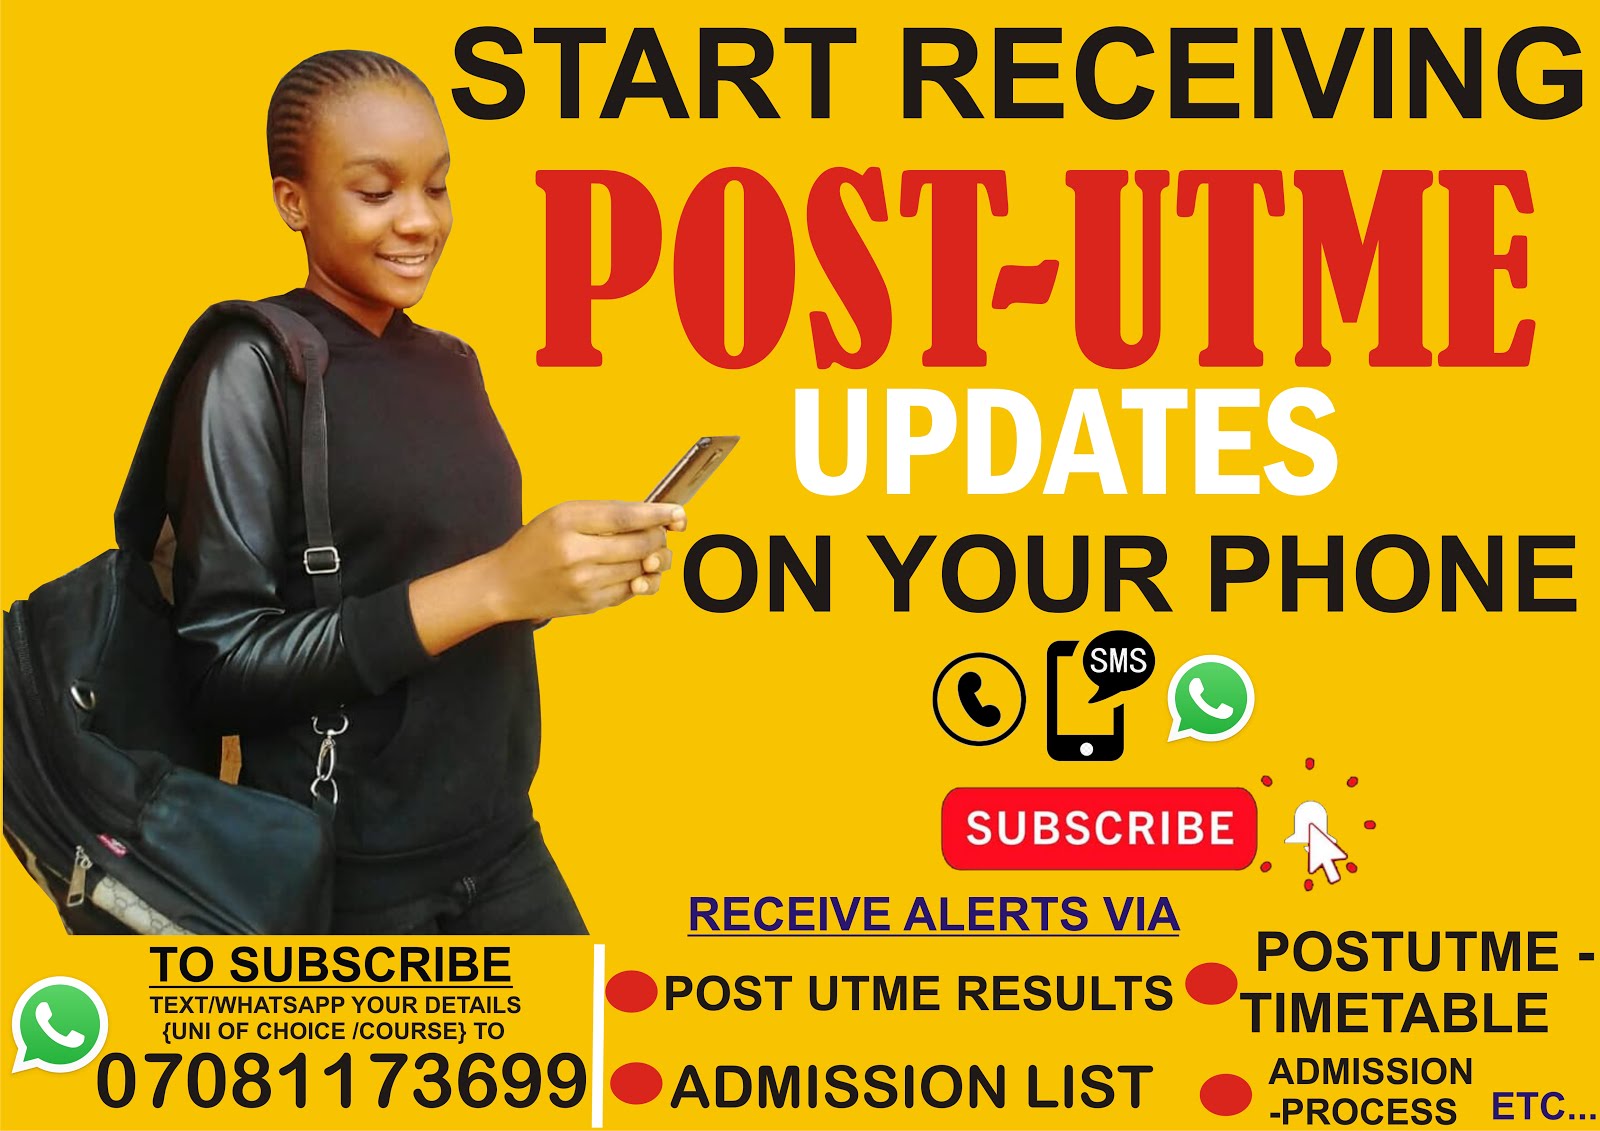 CLICK ON THIS IMAGE TO SUBSCRIBE FOR POSTUTME UPDATES